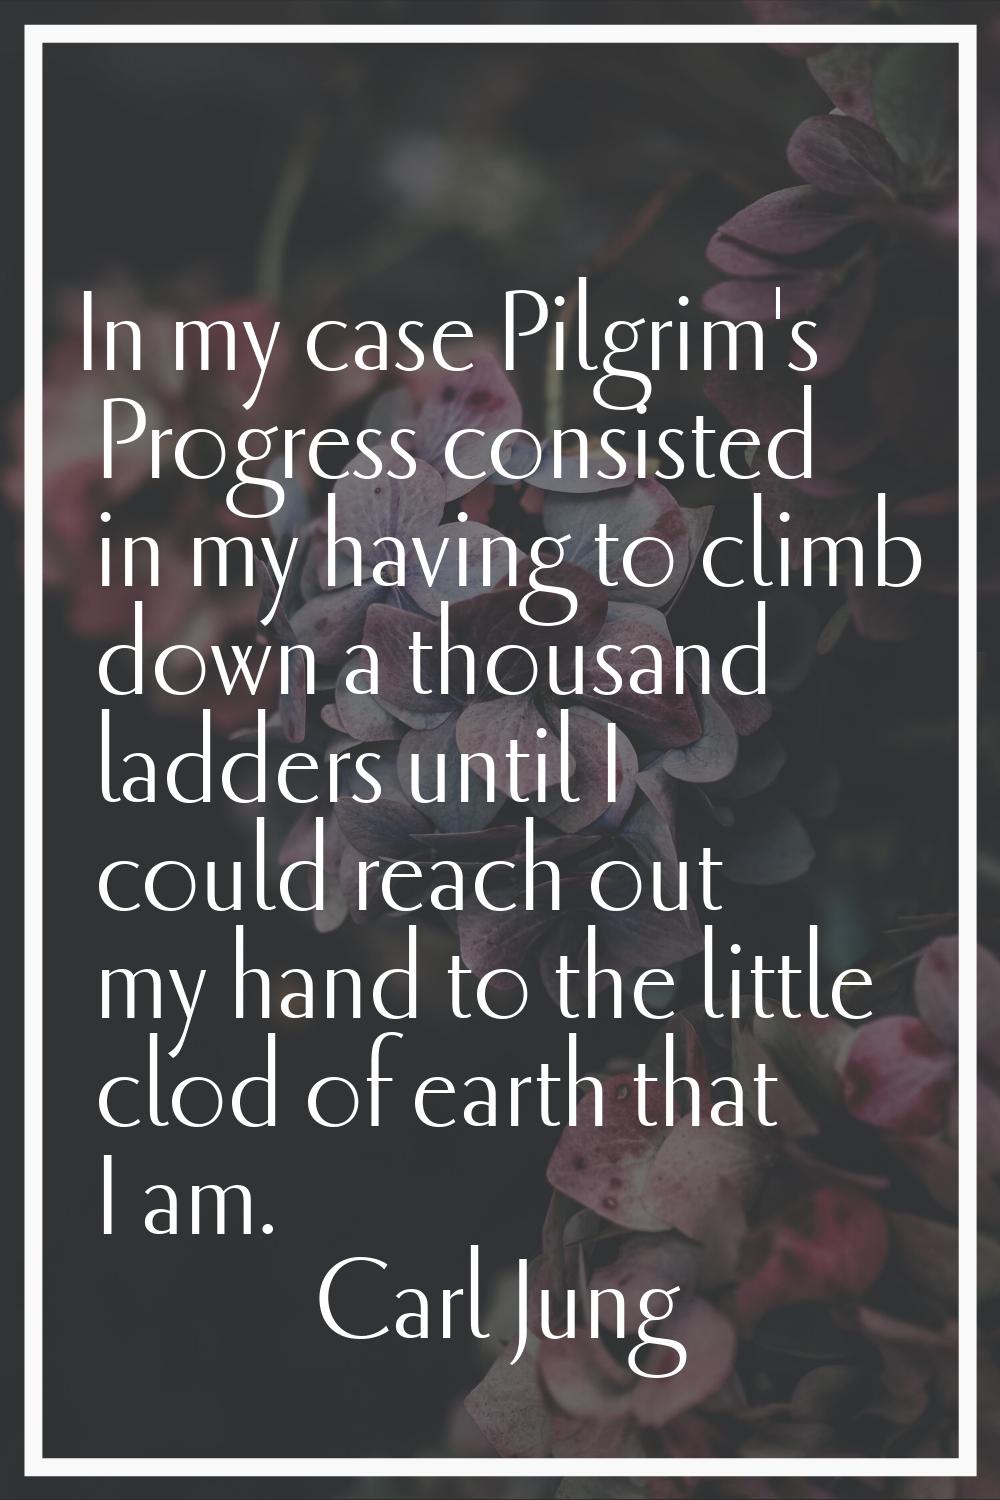 In my case Pilgrim's Progress consisted in my having to climb down a thousand ladders until I could